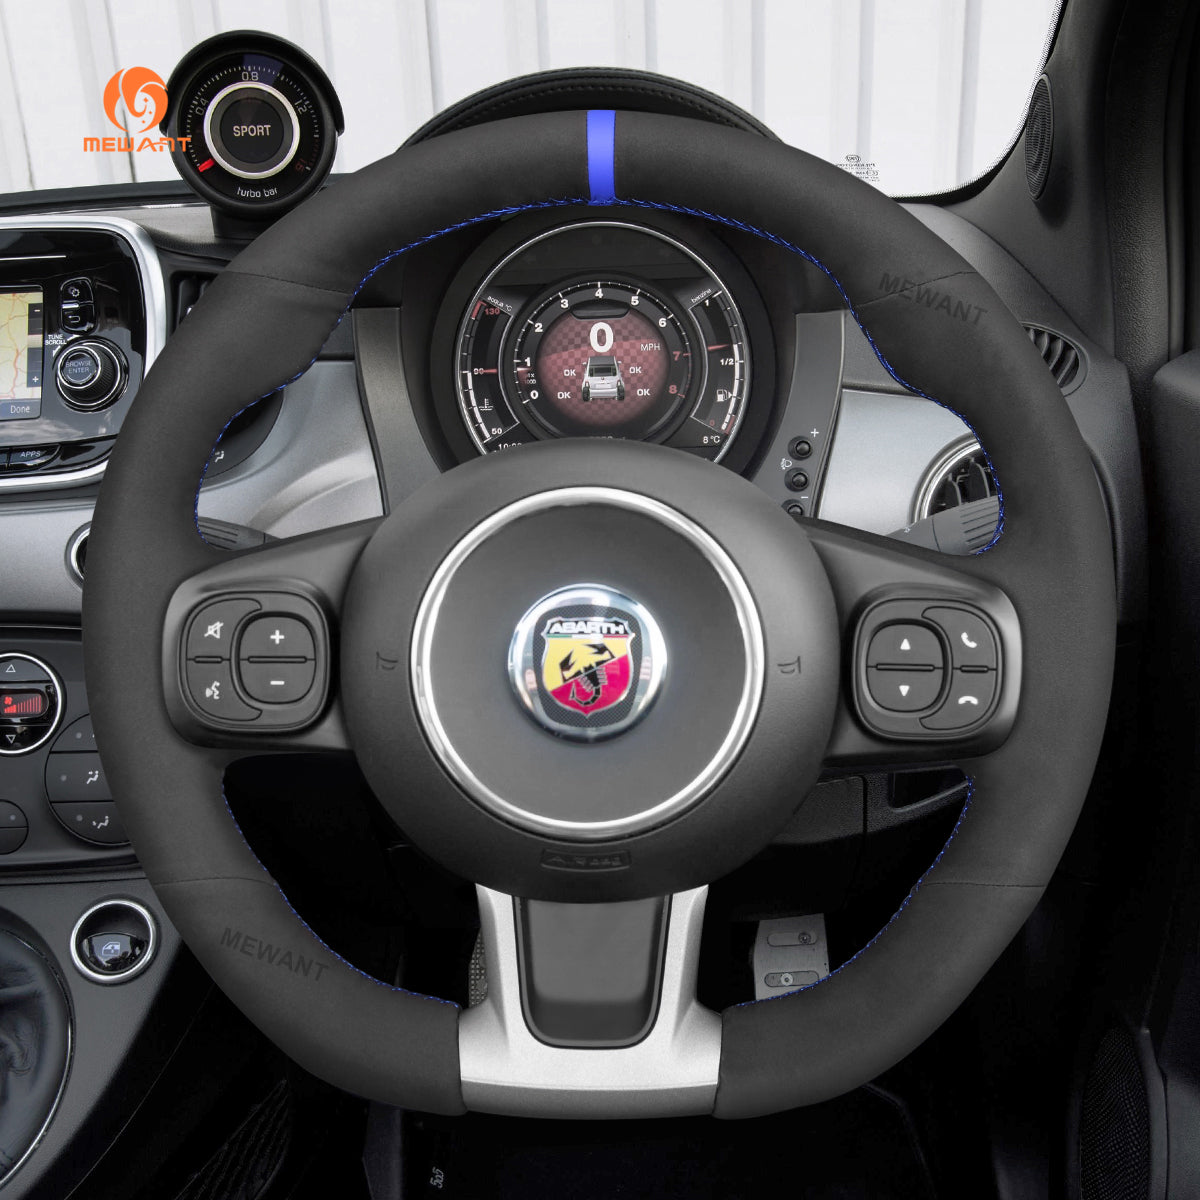 MEWANT Black Leather Suede Car Steering Wheel Cover for Abarth 595(C) 695(C) Fiat 500 Abarth 595 693